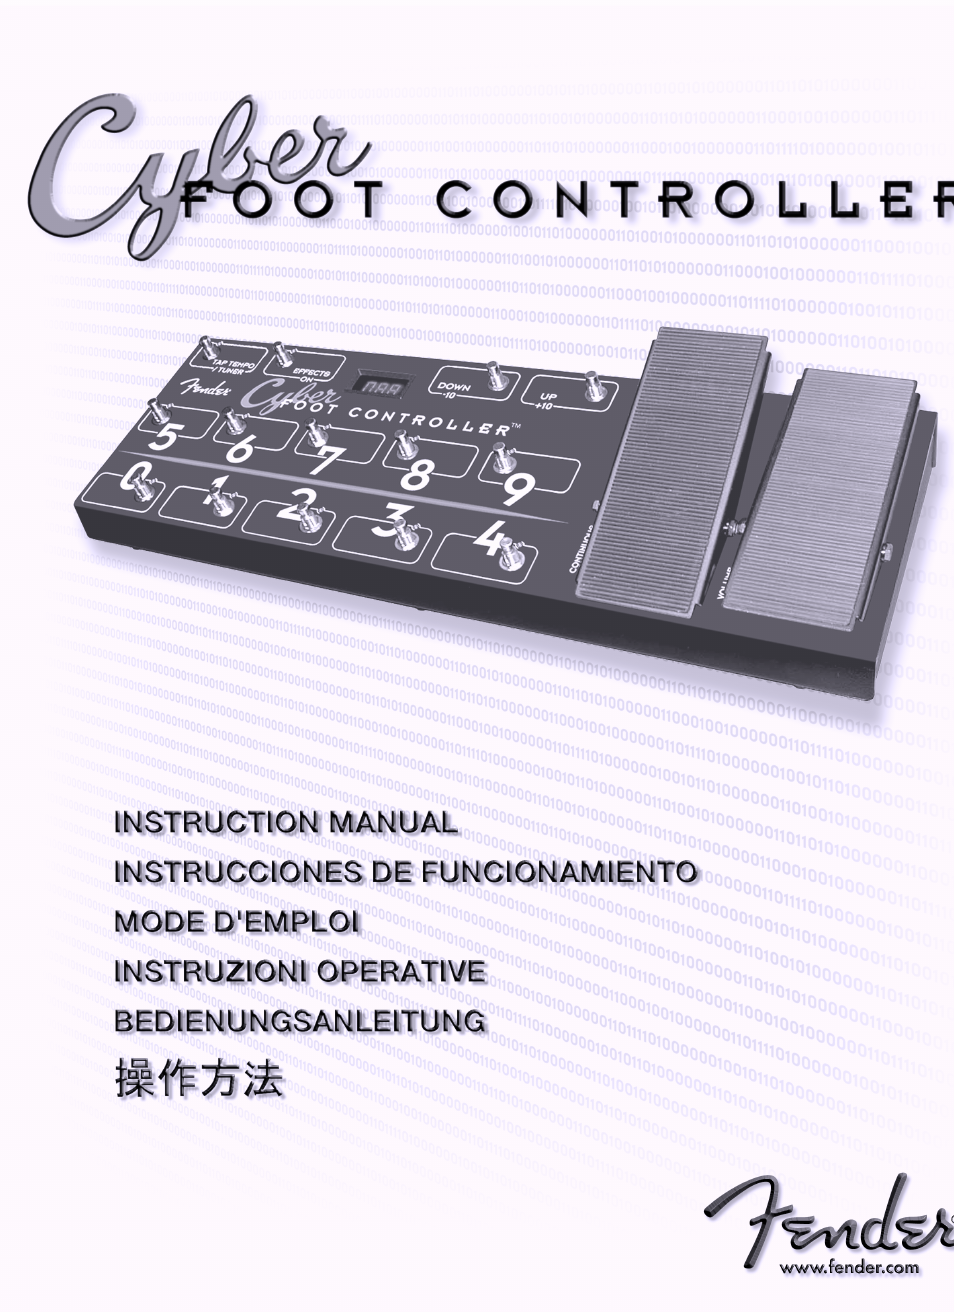 Fender Cyber Foot Controller User Manual | 16 pages